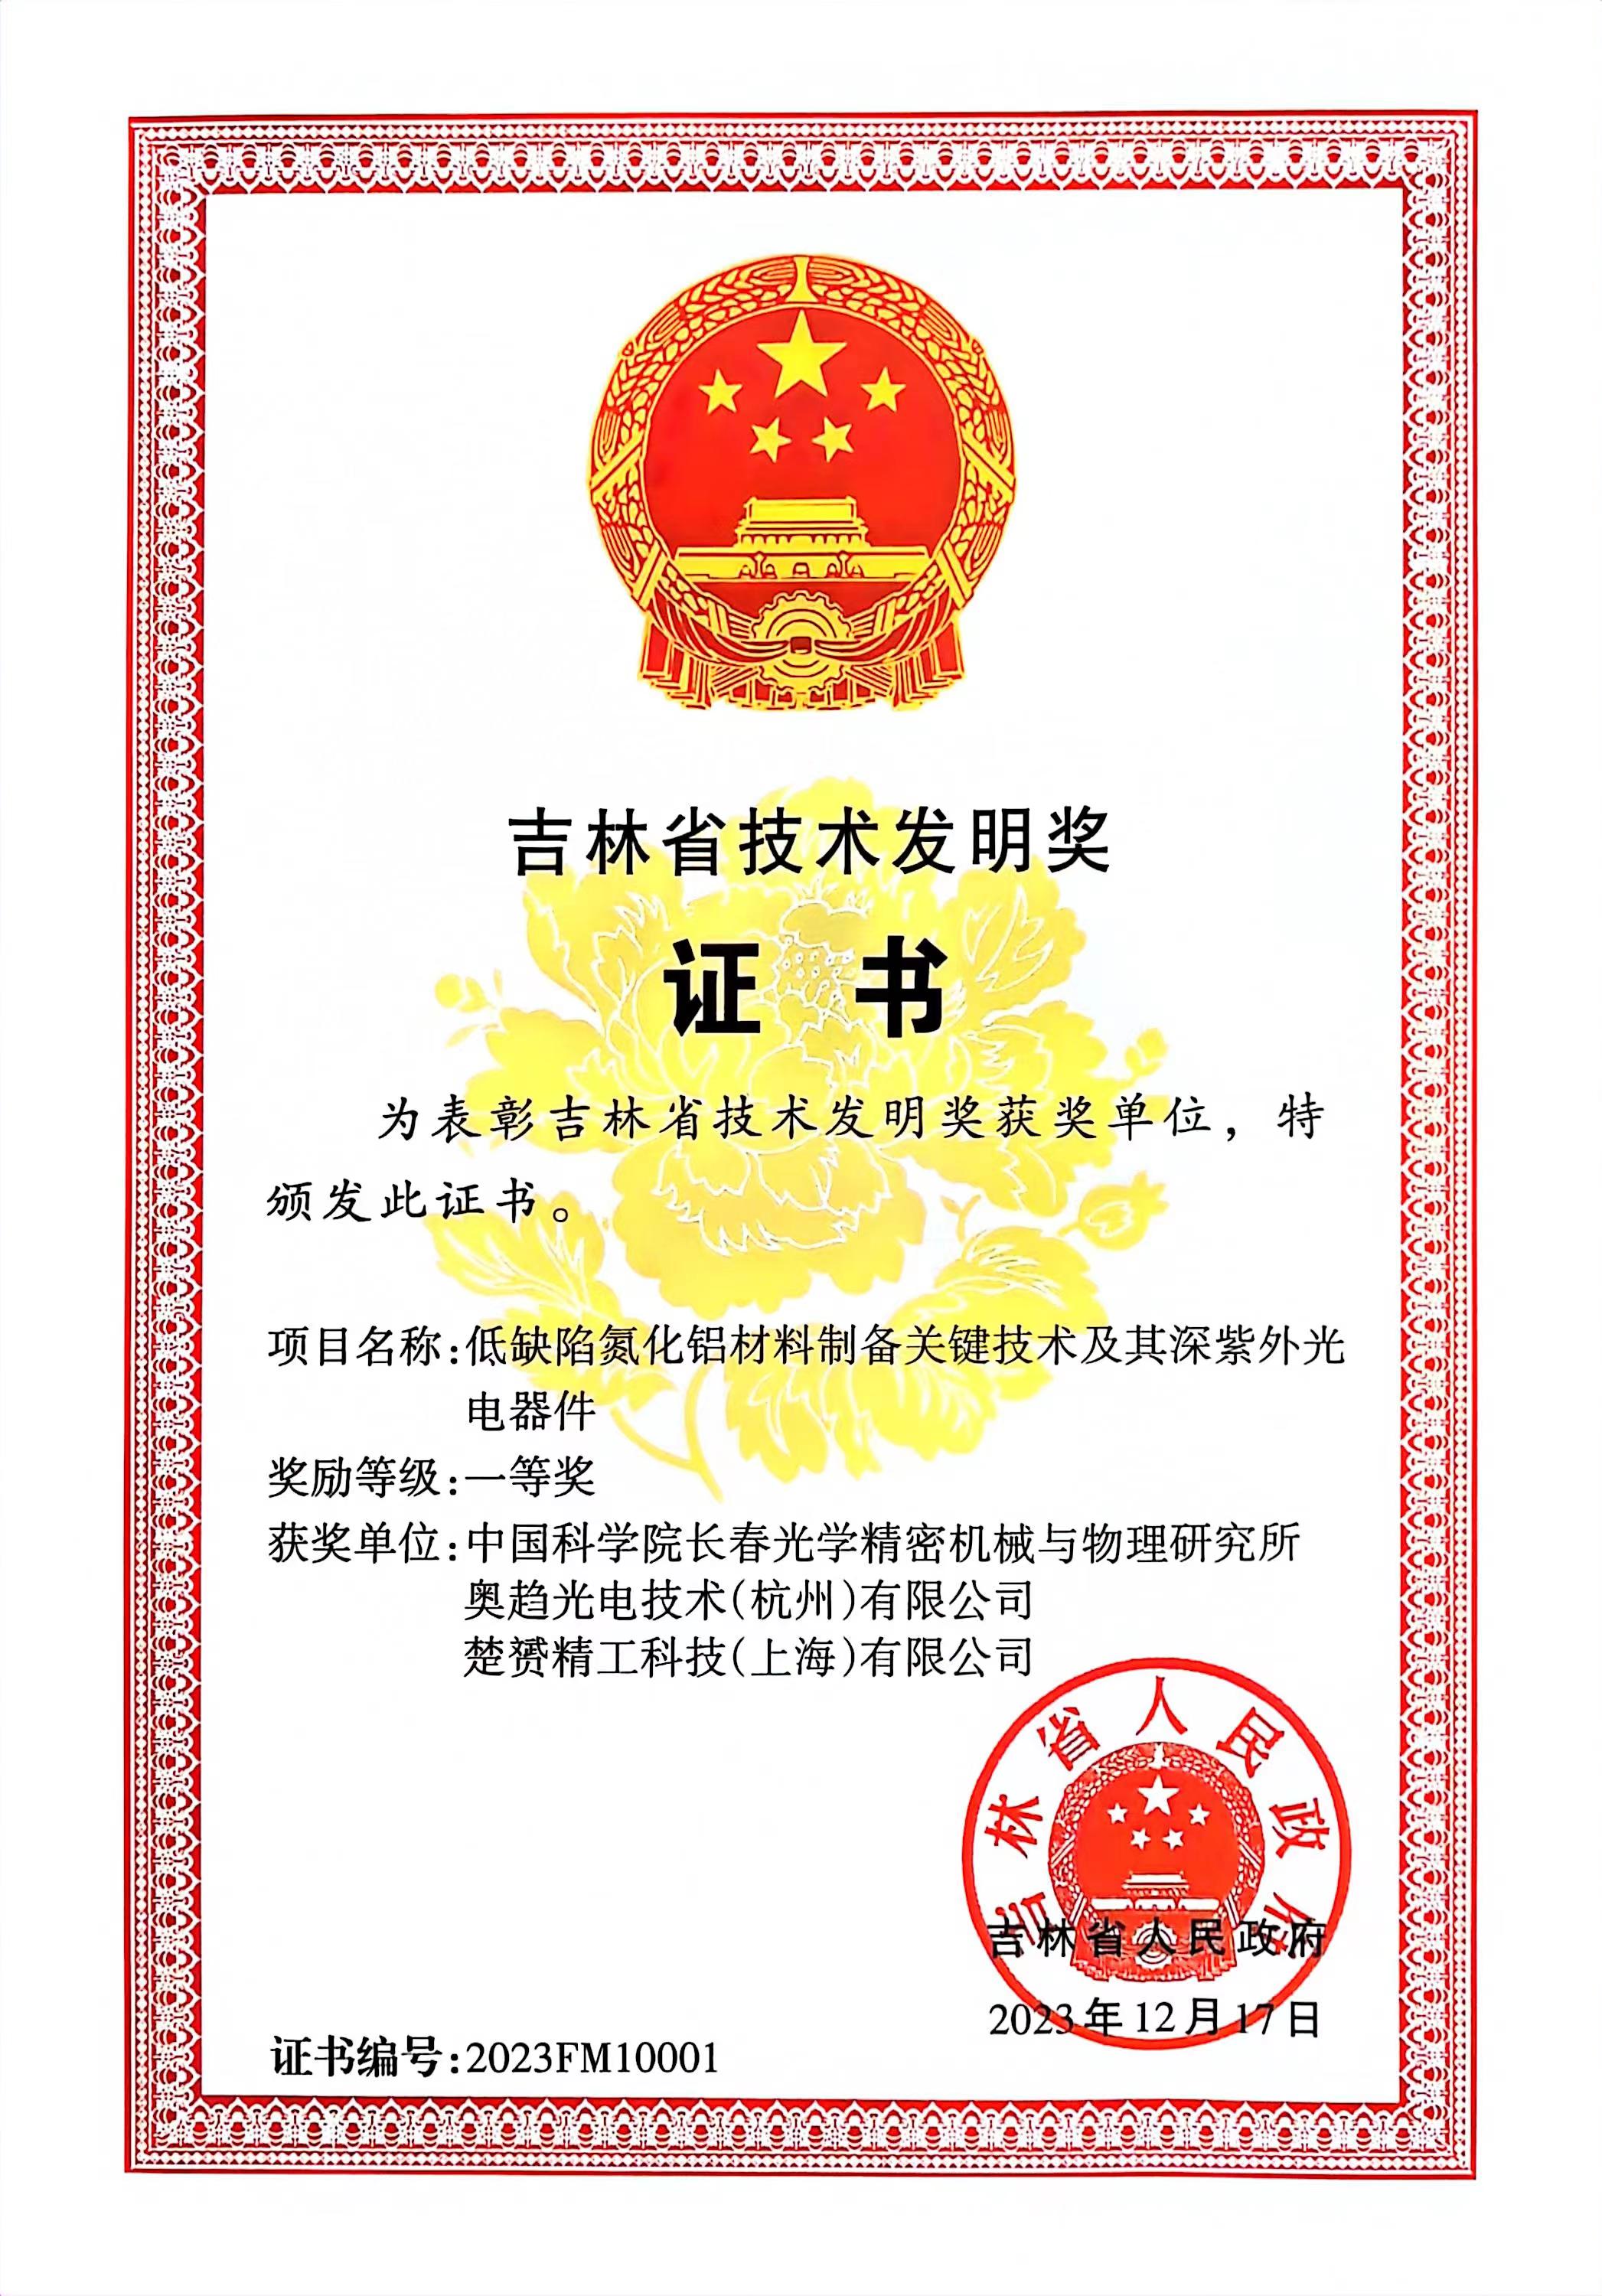 Technological Invention Award (first prize) of JiLin Province